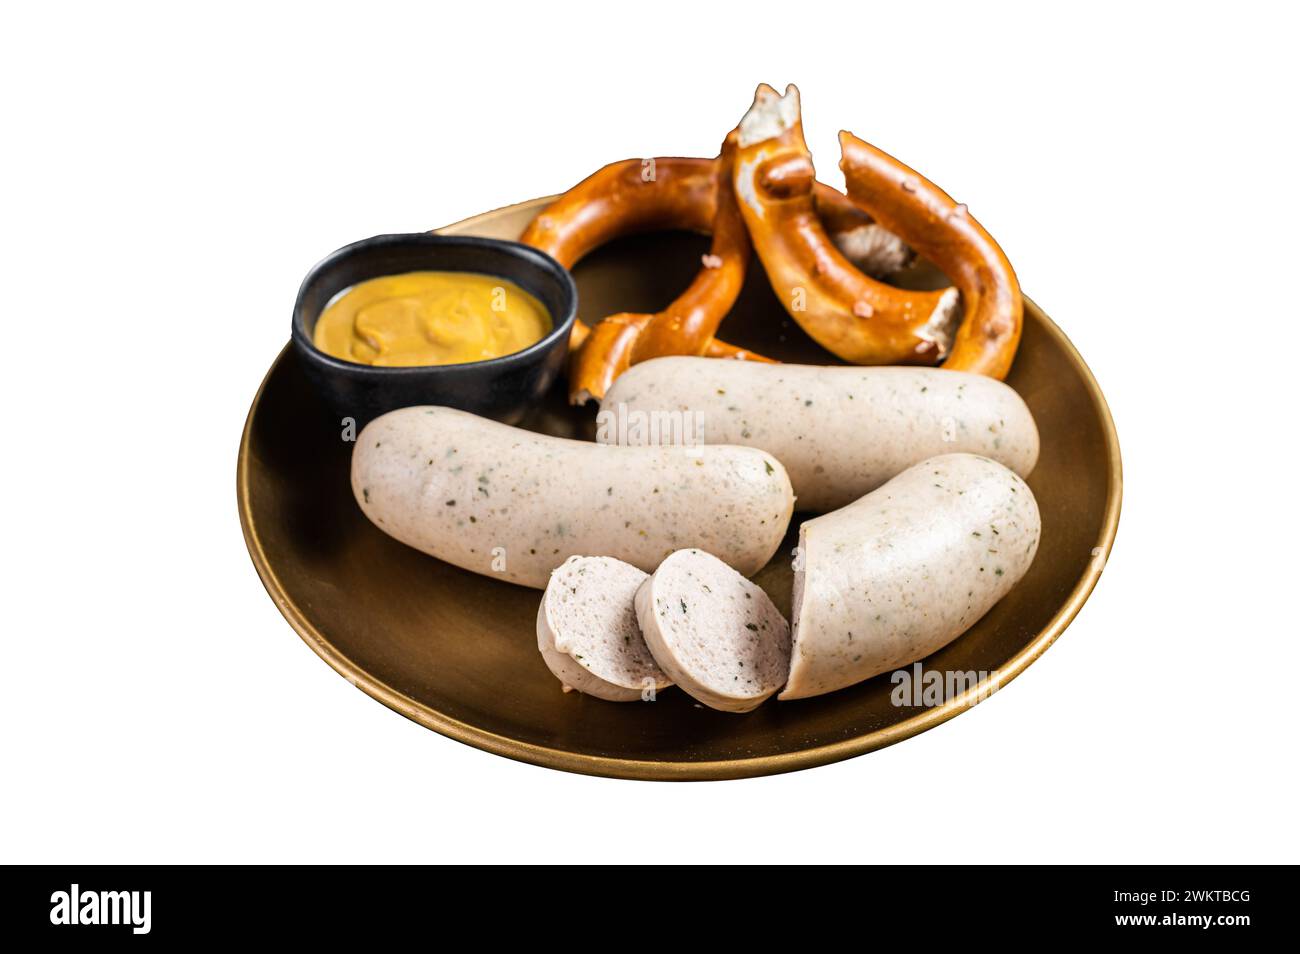 Munich white sausage with pretzel and mustard. Isolated on white background Stock Photo